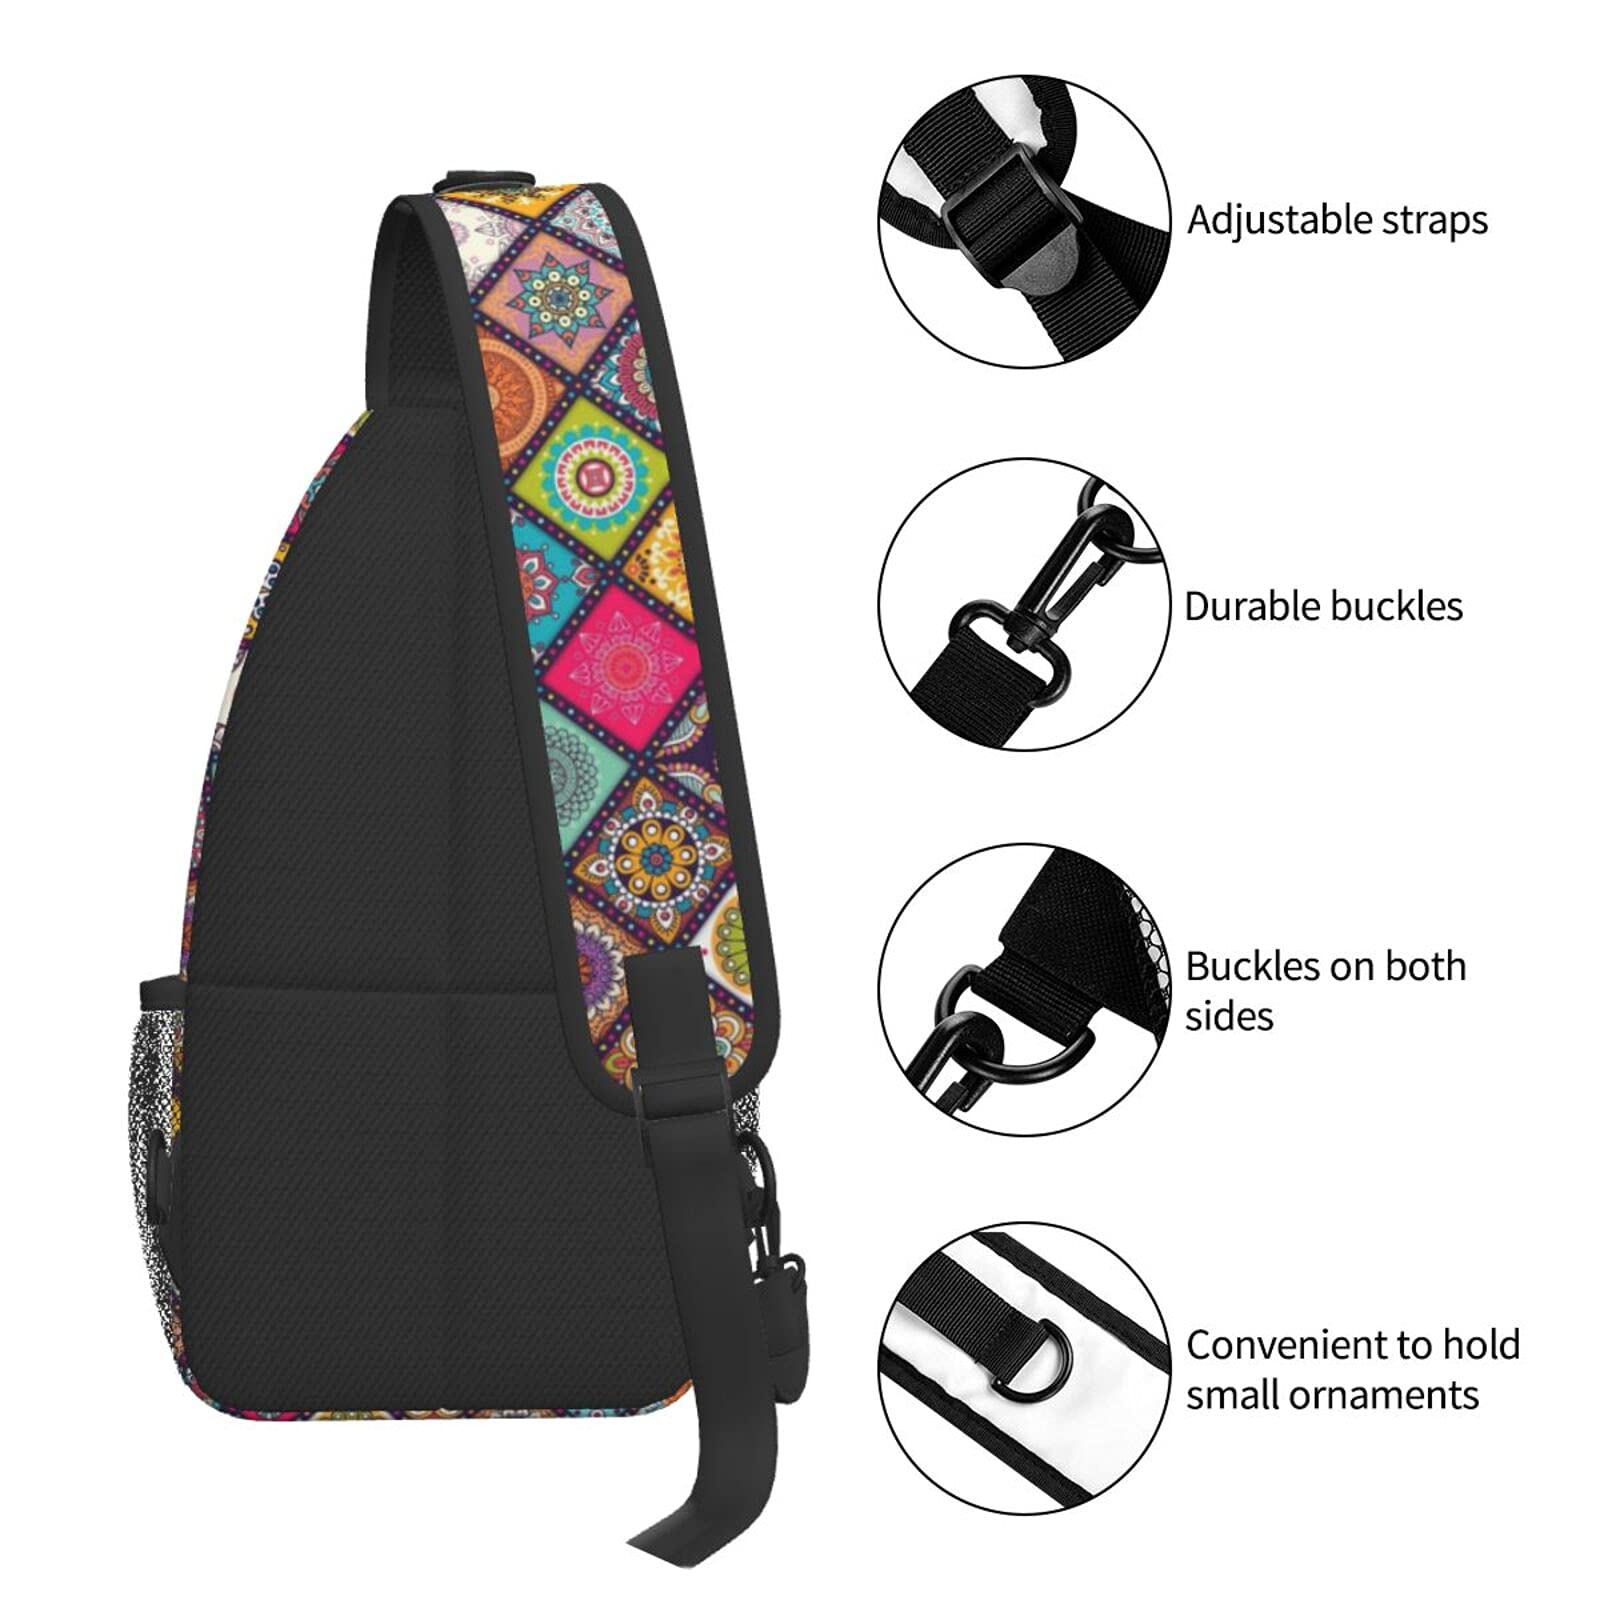 Yrebyou Sling Bag Chest Crossbody Backpack Travel Hiking Daypack for Women Men with Strap Purse Lightweight Shoulder Bags